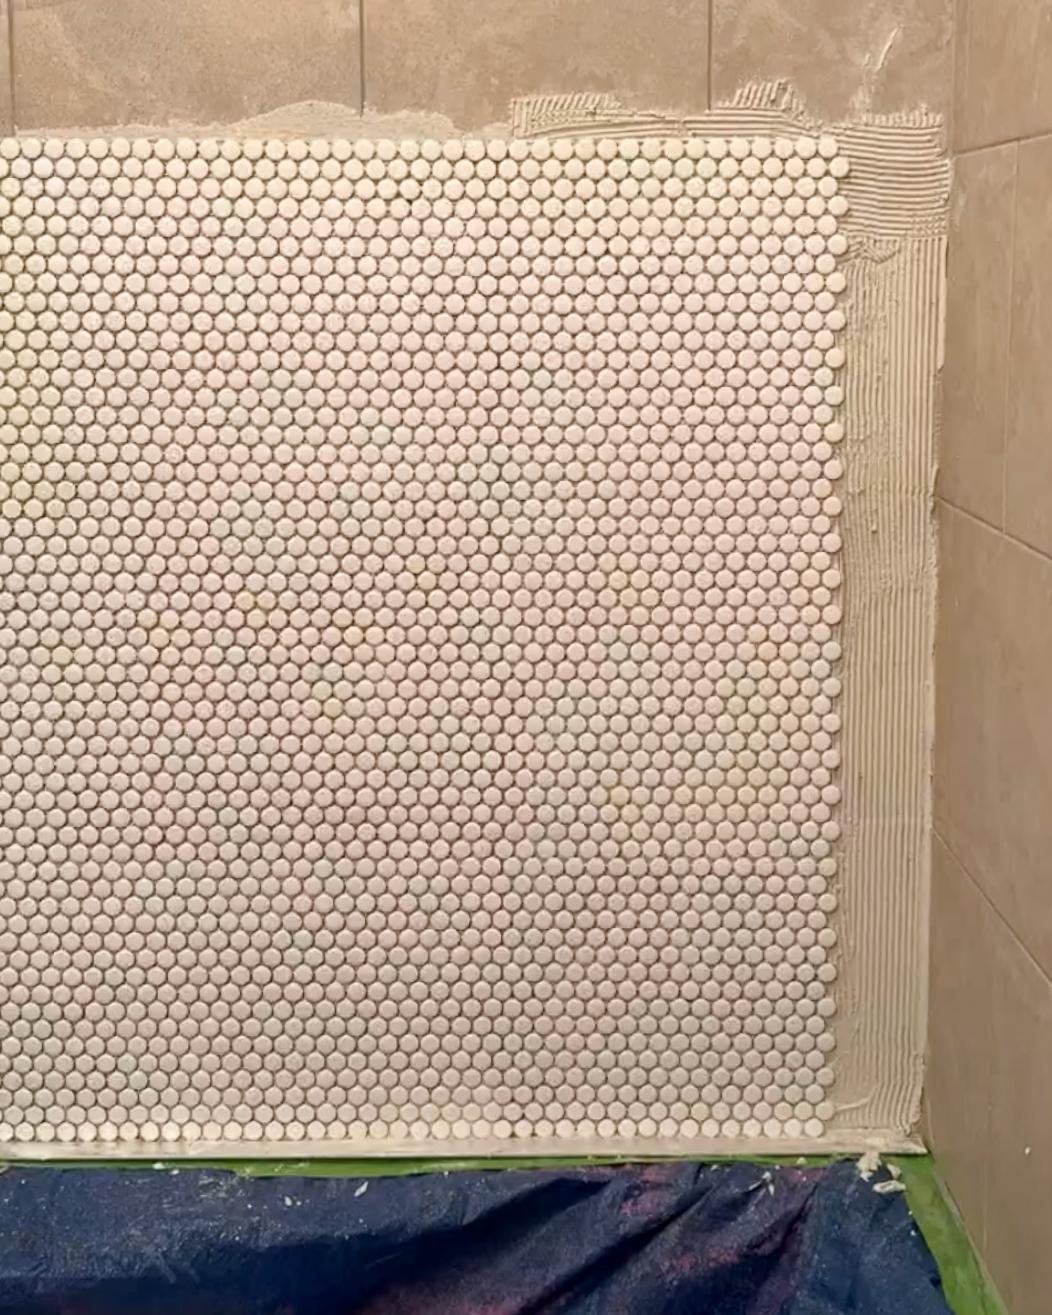 penny tiles being installed in shower over existing tiles